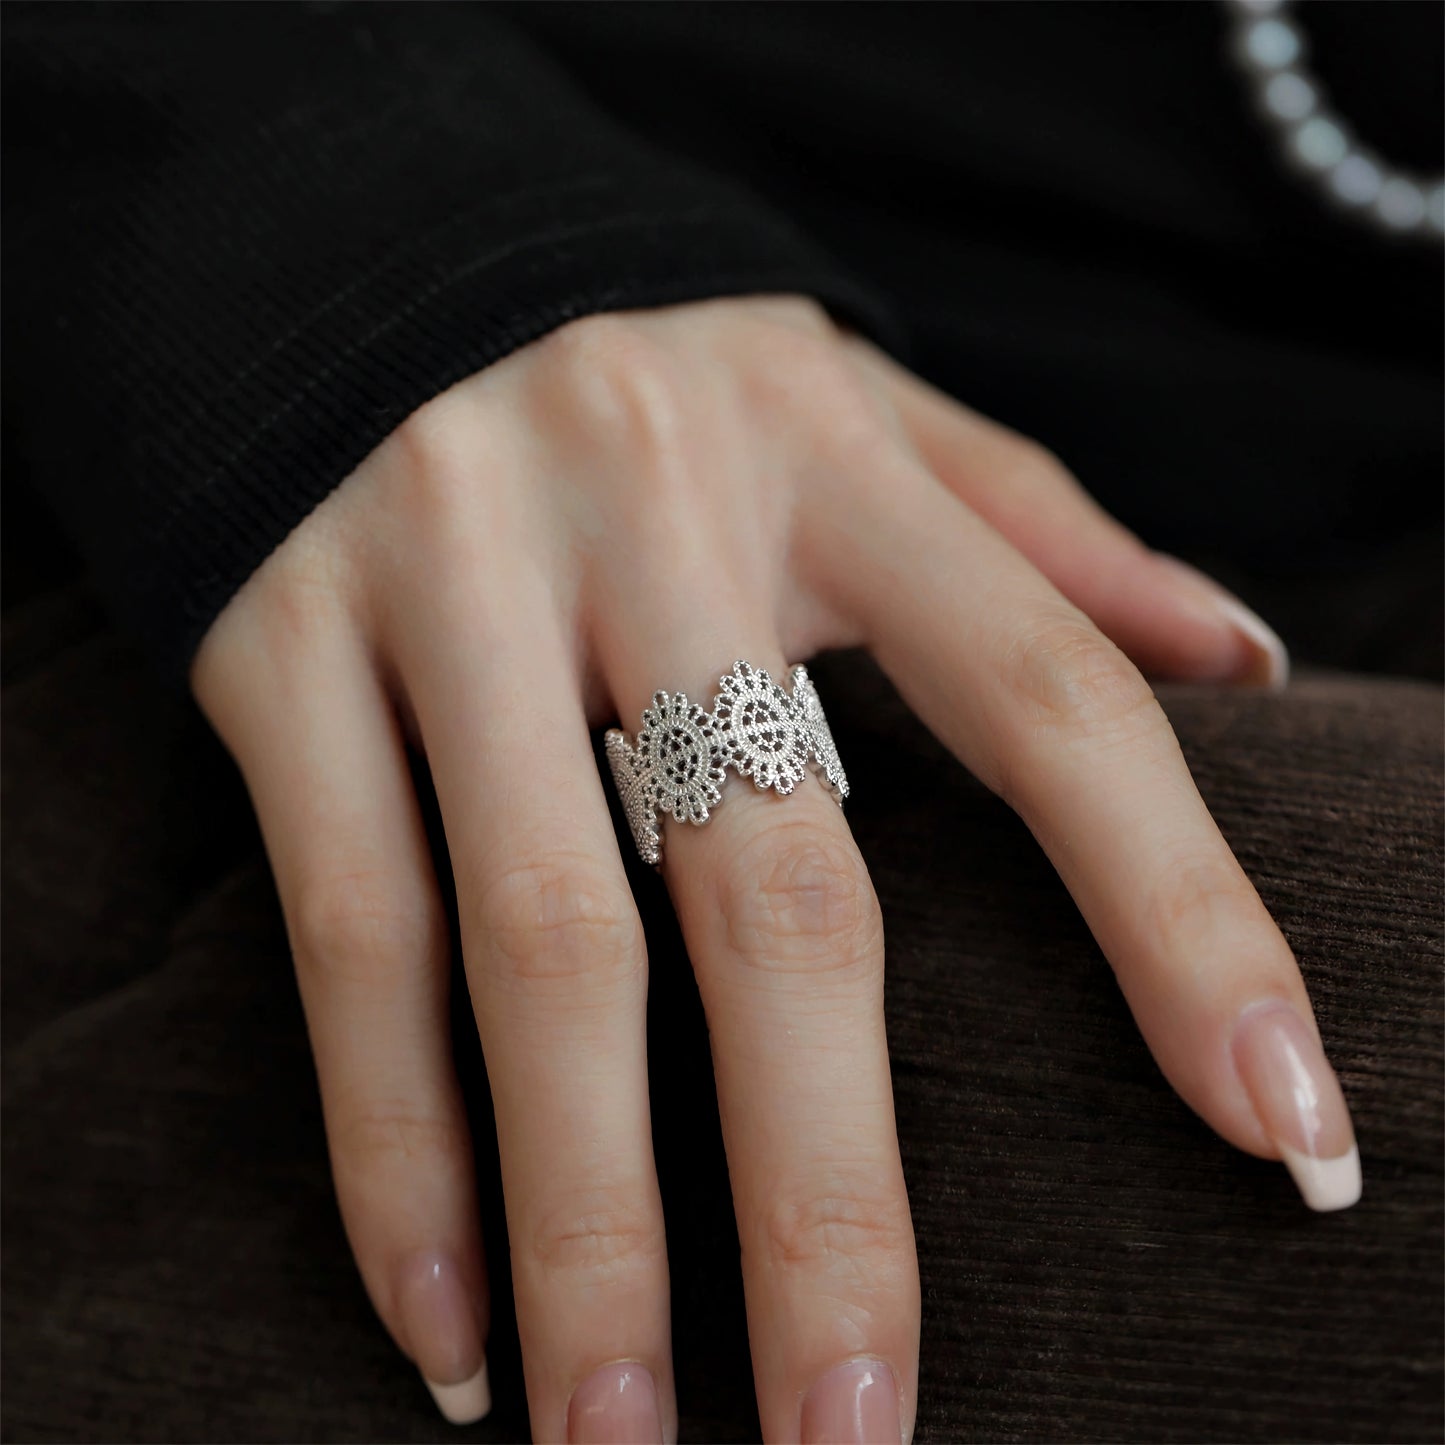 925 Silver Filigree Ring, Vintage Lace Ring, Unique Wide Band Rings, Lace Ring, Sterling Silver Statement Jewelry Gift for Her